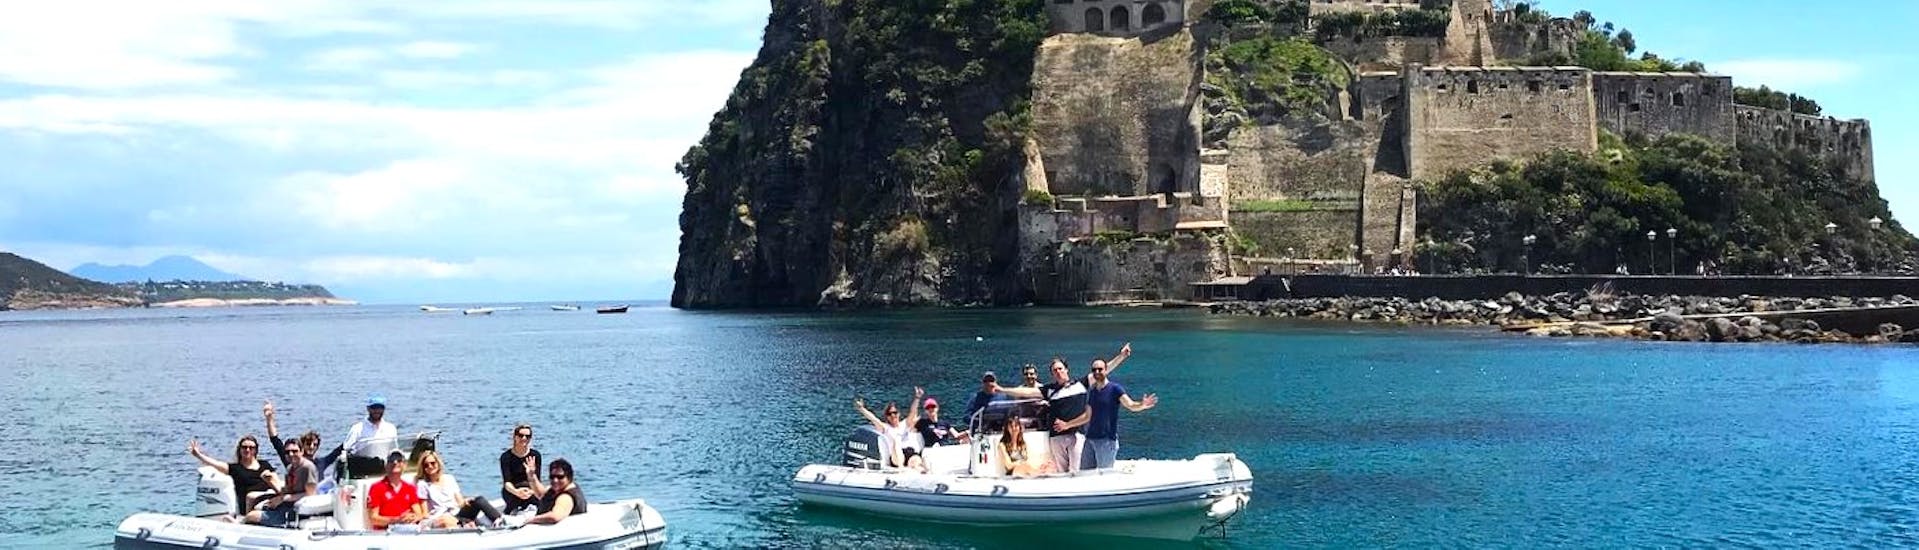 view from the sea of the Aragonese Castle that you can see during the private RIB Boat Trip to Ischia and Procida with Apéritif and Snorkeling organized by Seaside Napoli.